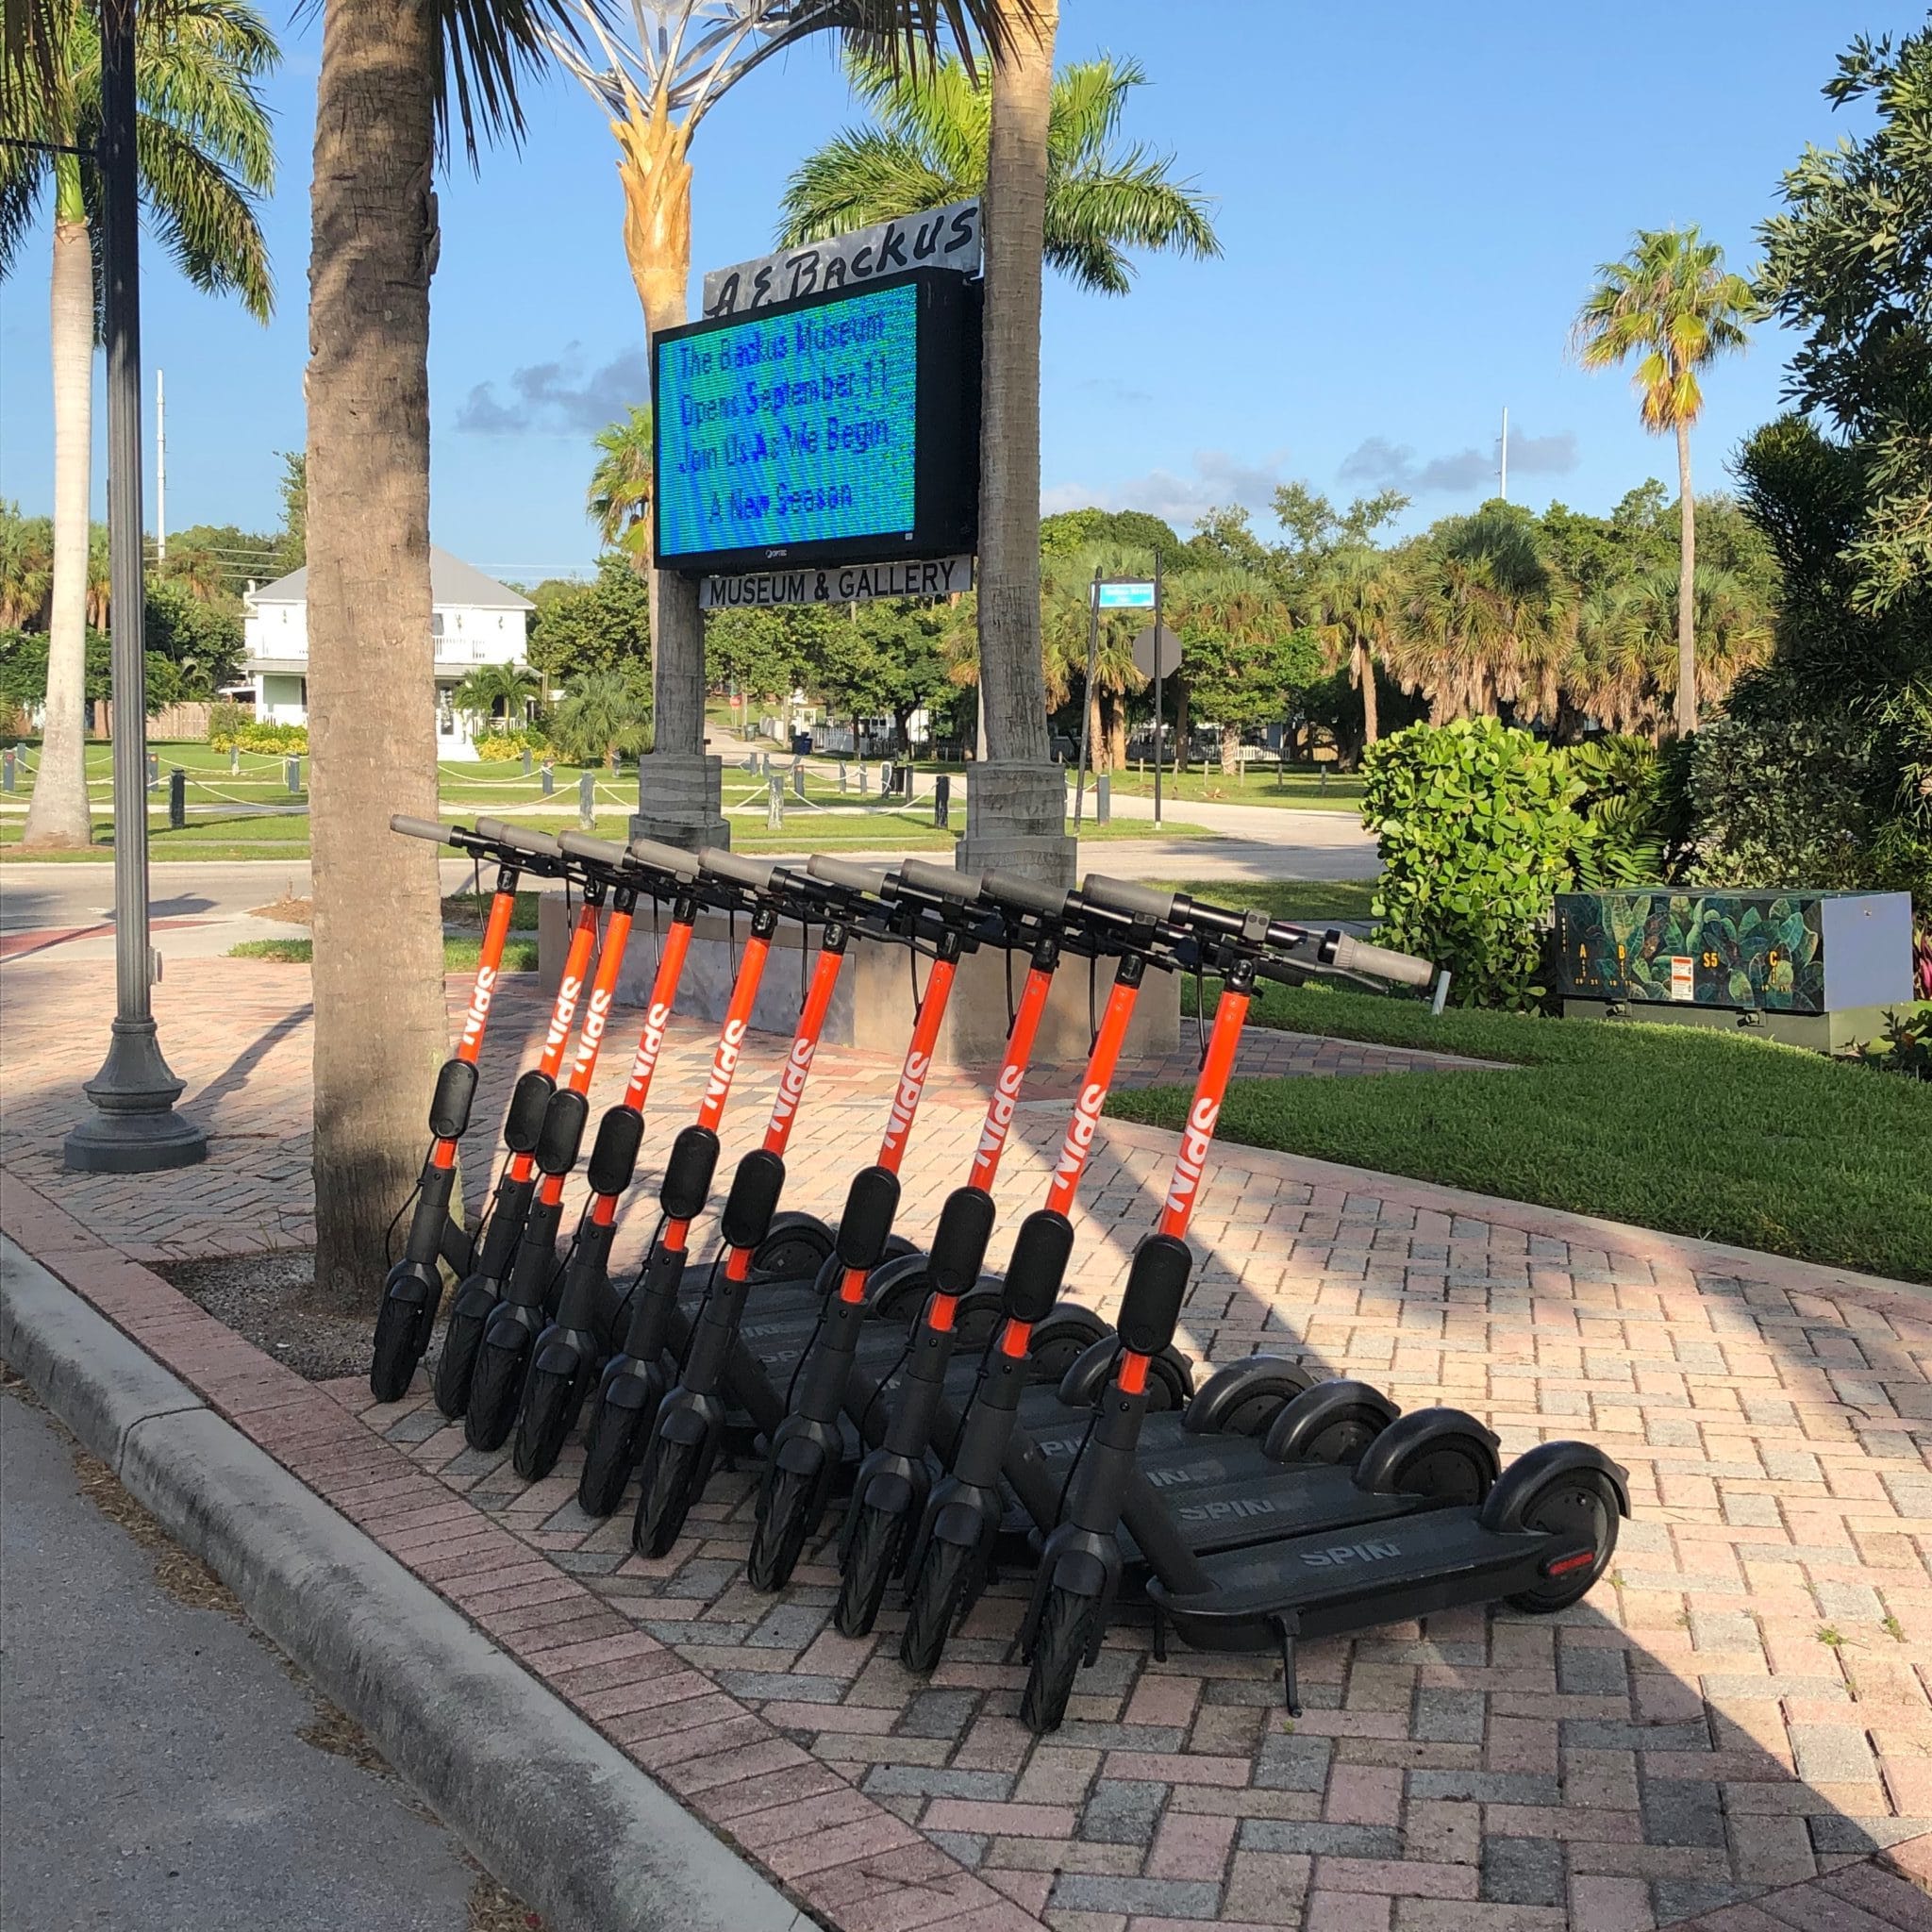 Electric Rental Scooters Come to Fort Pierce!